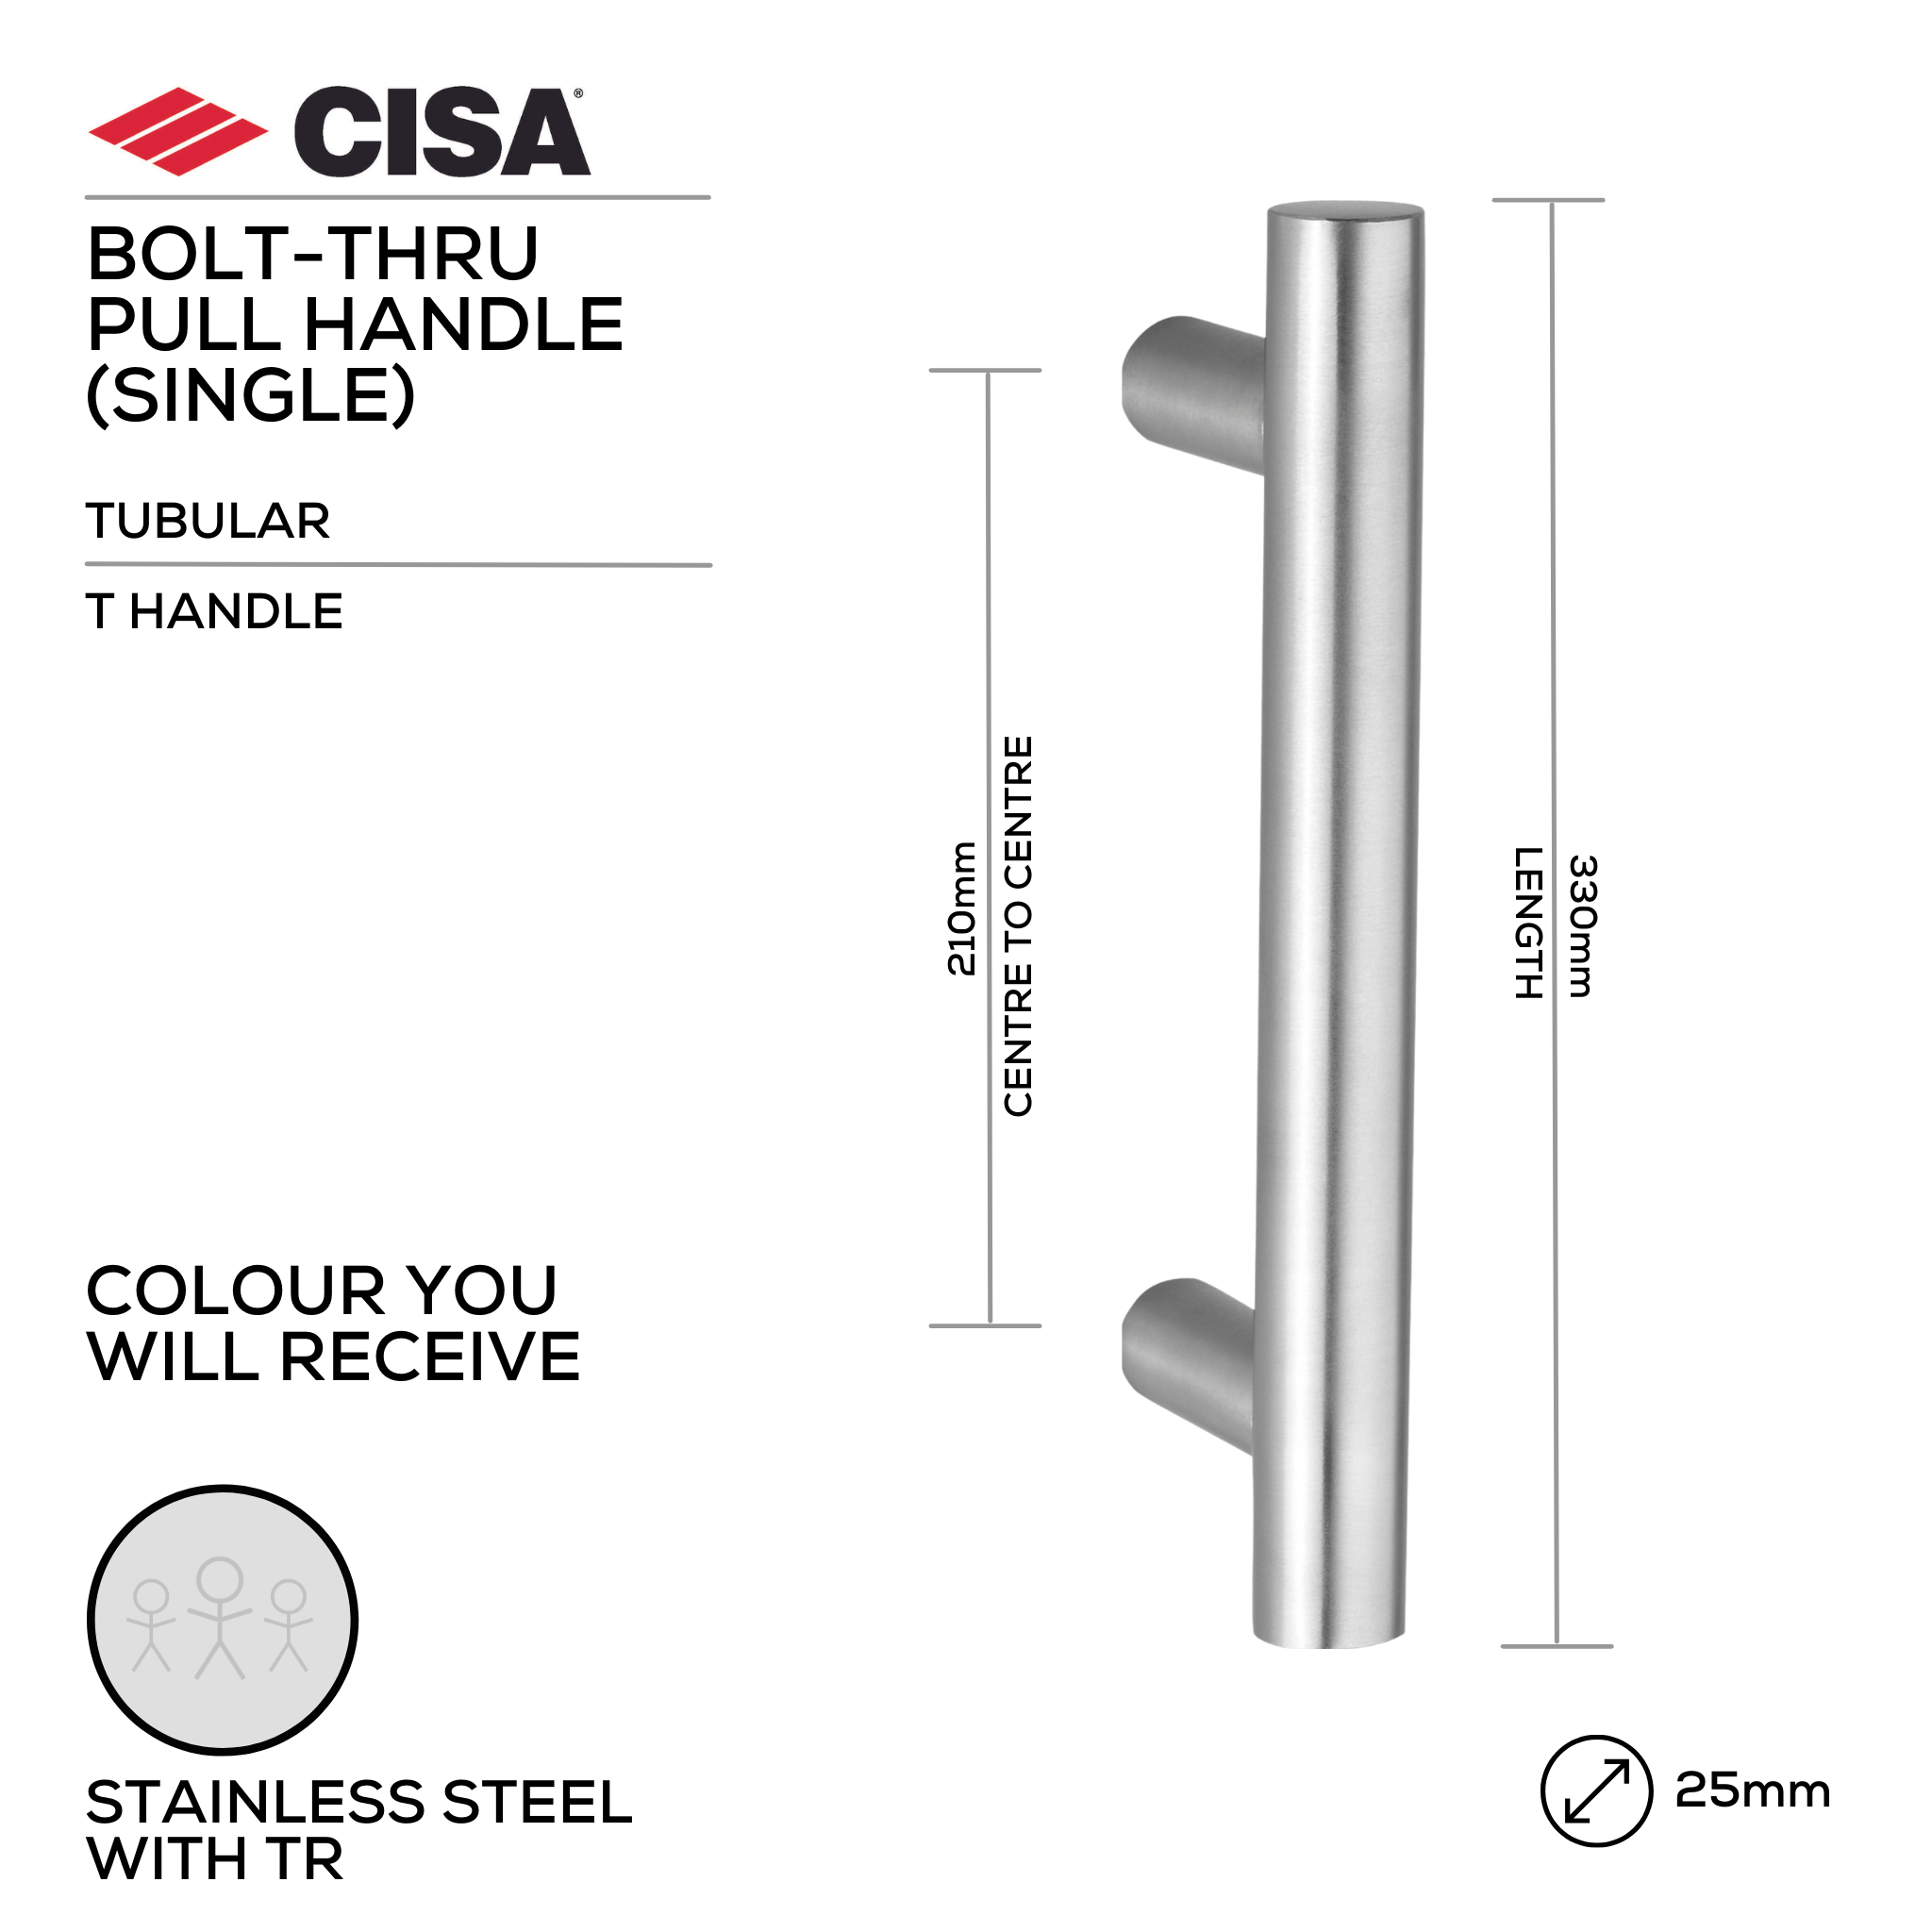 FP.T02.BTF.TR, Pull Handle, Tubular, T Handle, BoltThru, 25mm (Ø) x 330mm (l) x 210mm (ctc), Stainless Steel with Tarnish Resistant, CISA